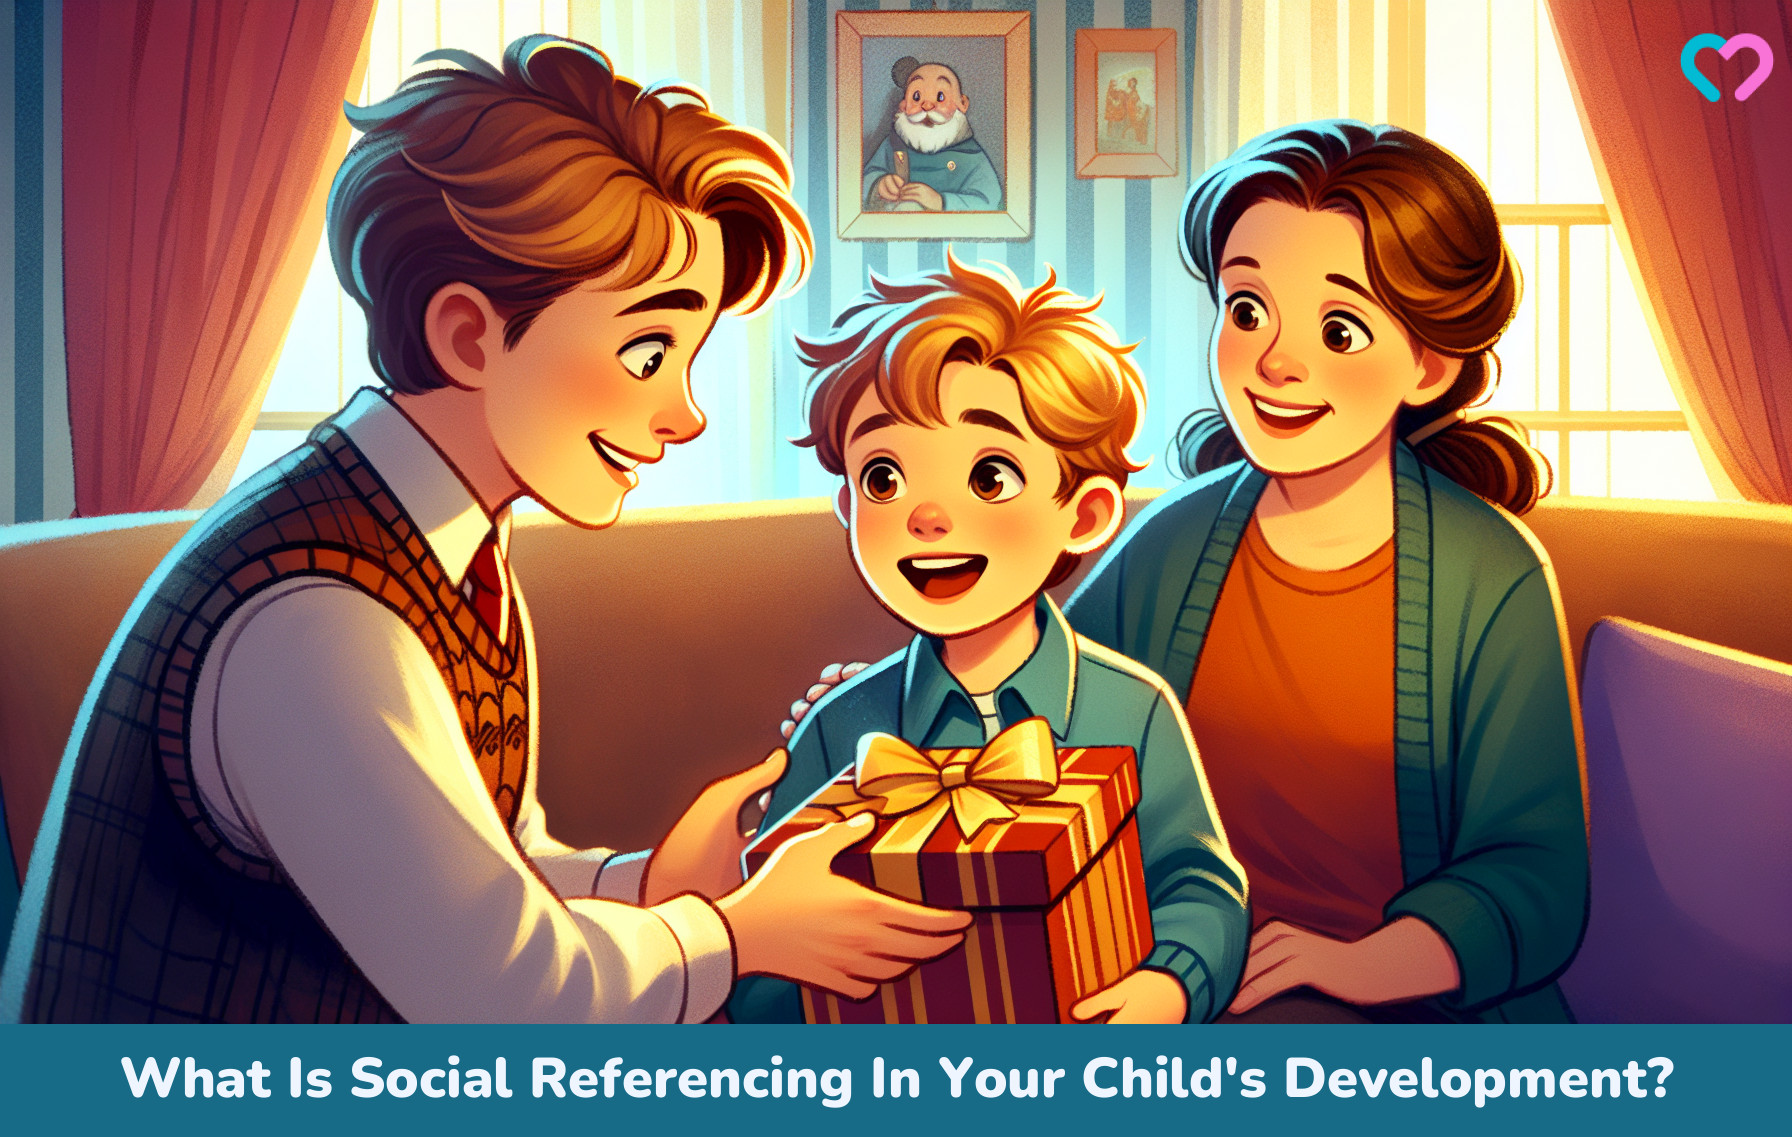 Social Referencing In A Child's Development_illustration